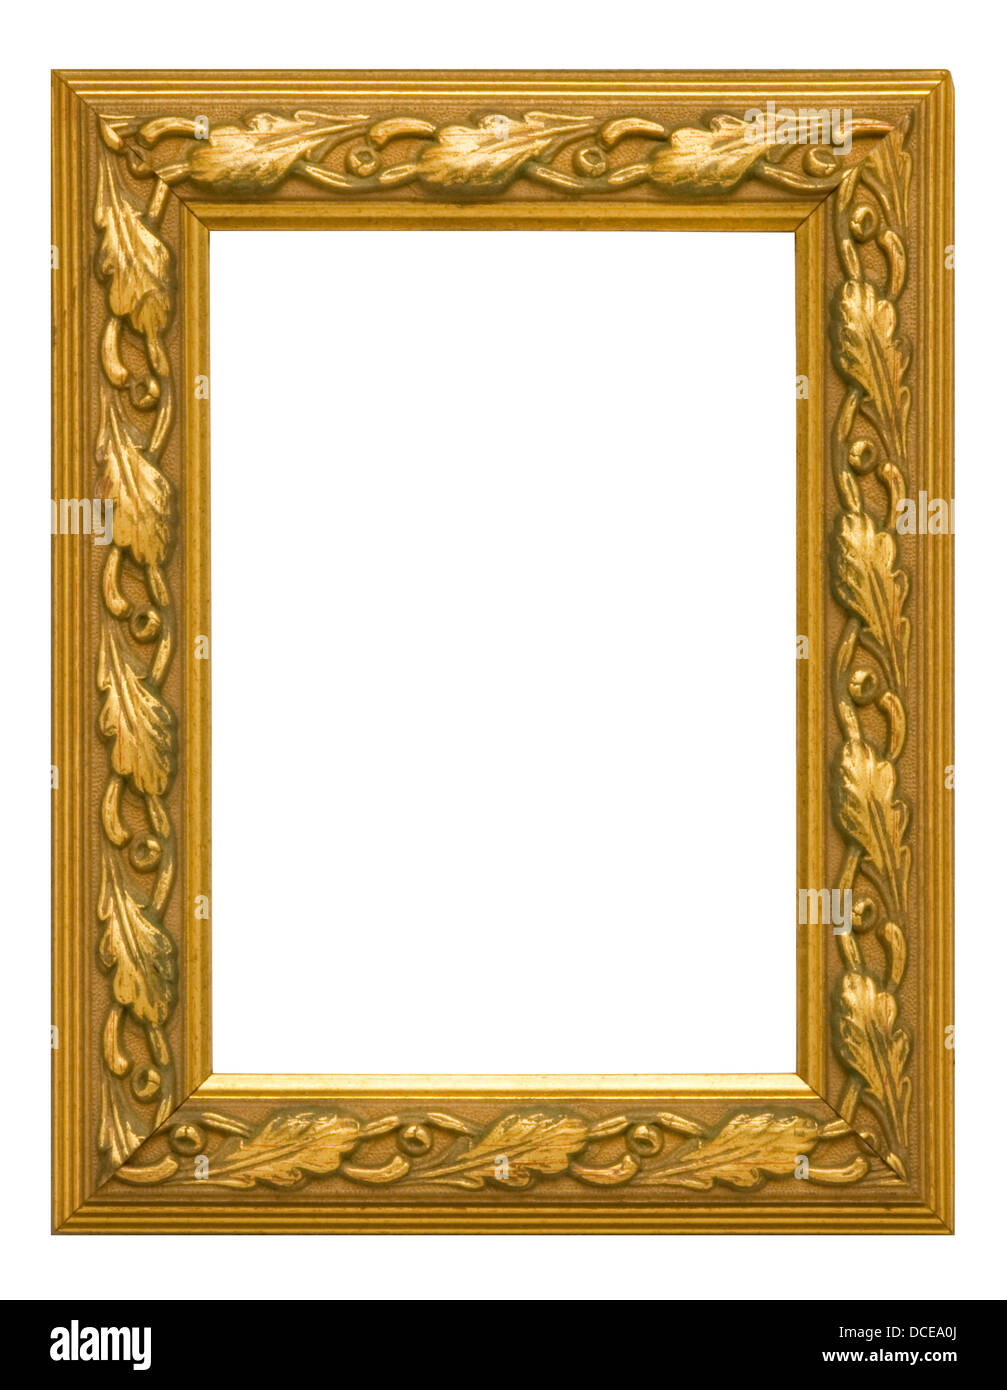 Antique gold vertical picture frame against white background Stock Photo